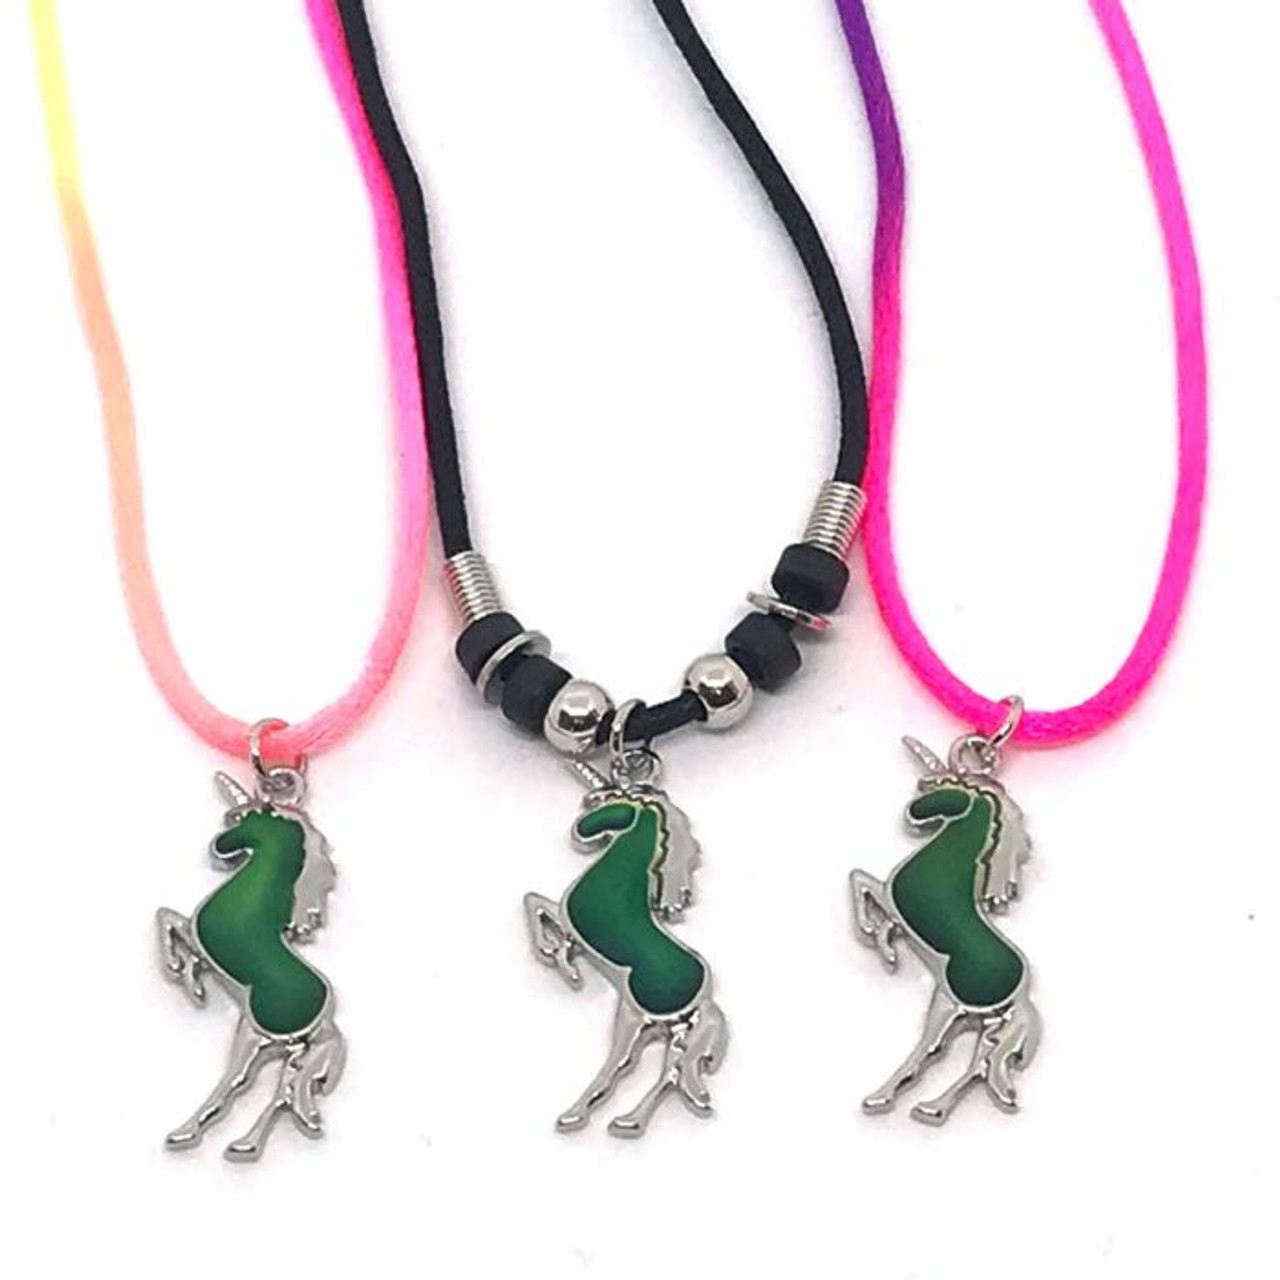 Great Party Bag Stocking Filler Toy A21 Cute Kids Unicorn Mood Necklace 